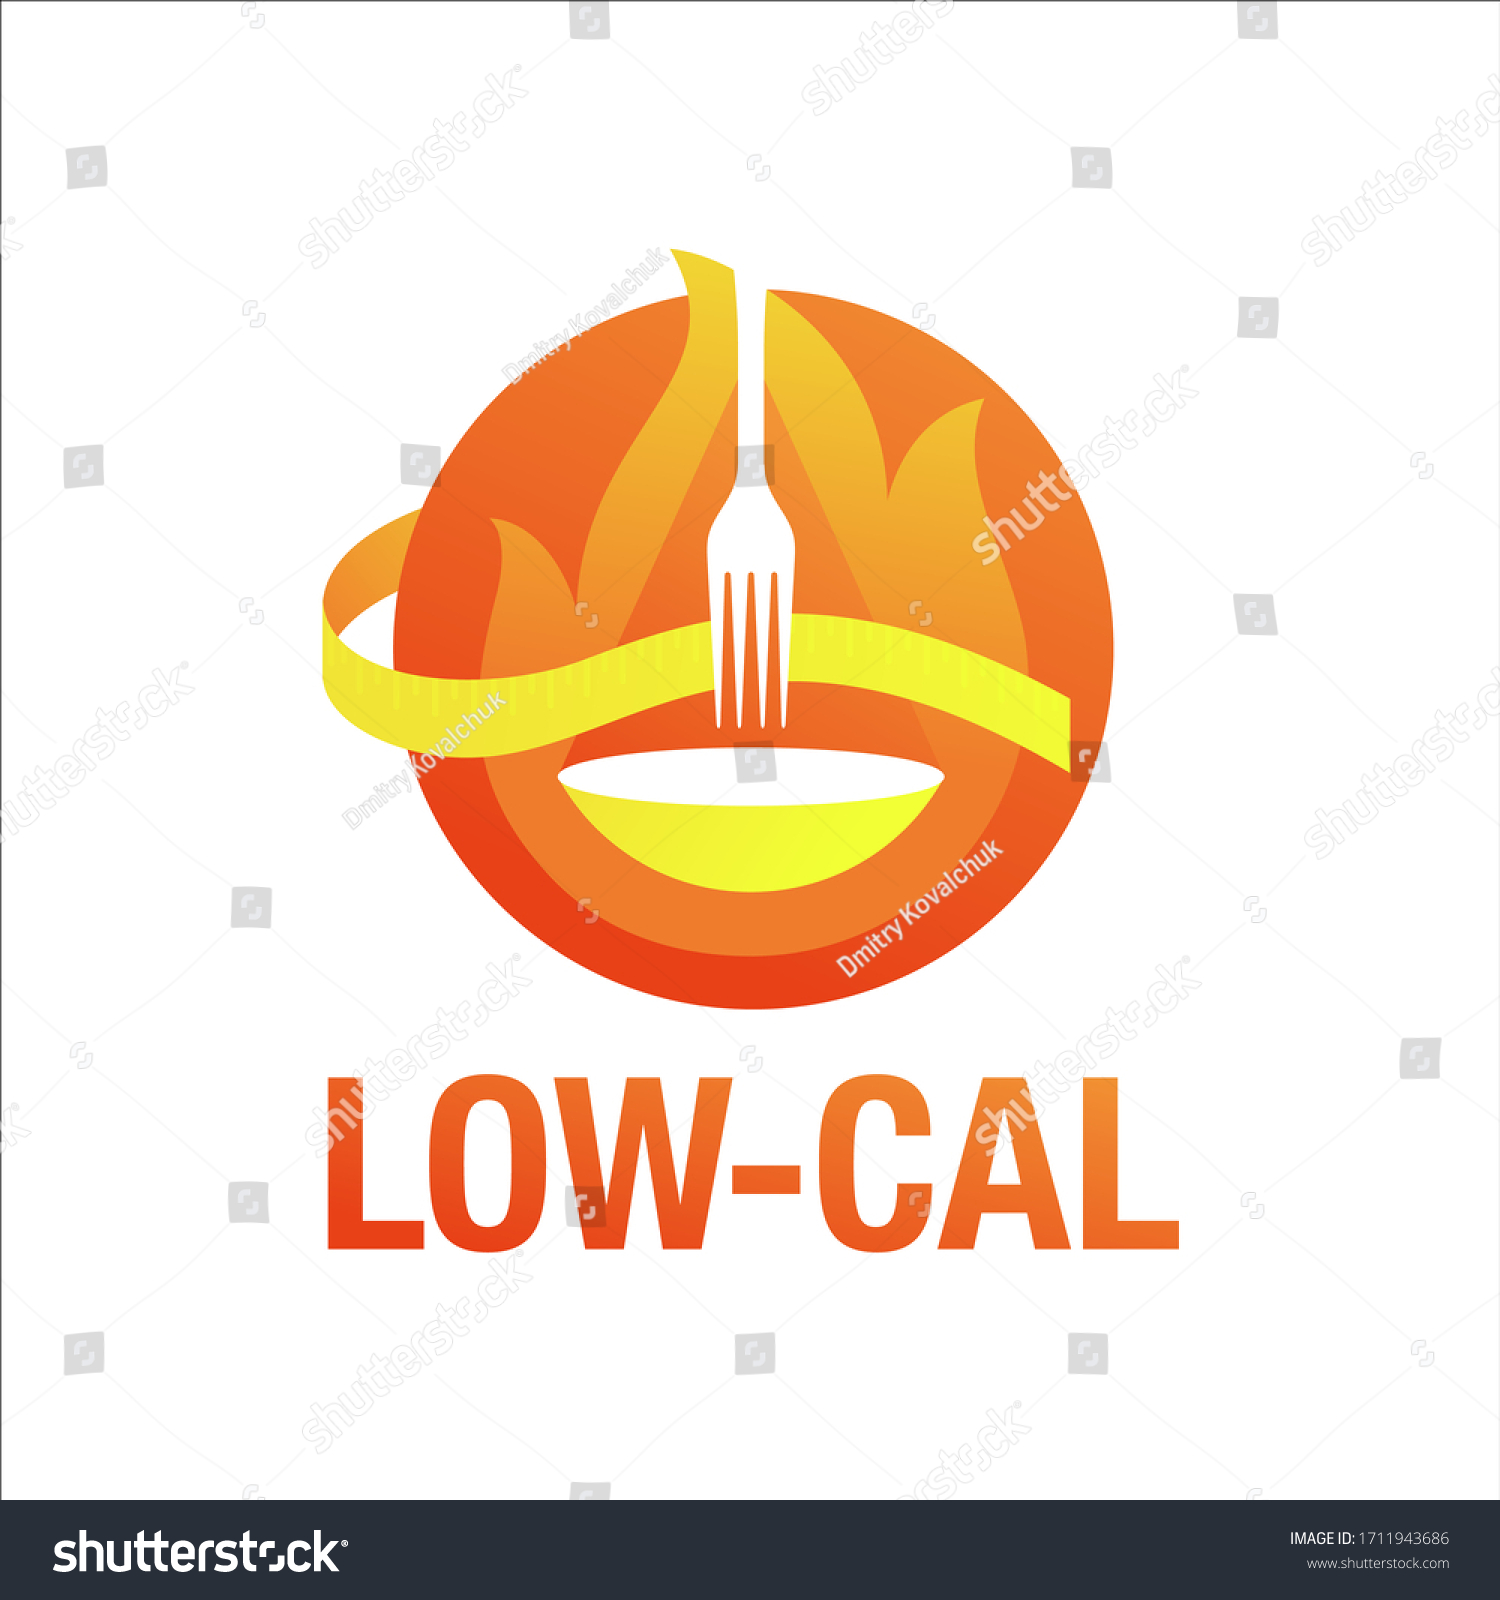 SVG of Low cal icon - emblem for packaging of low calories diet food products - circular stamp with weight scales, burning fire and measuring tape around svg